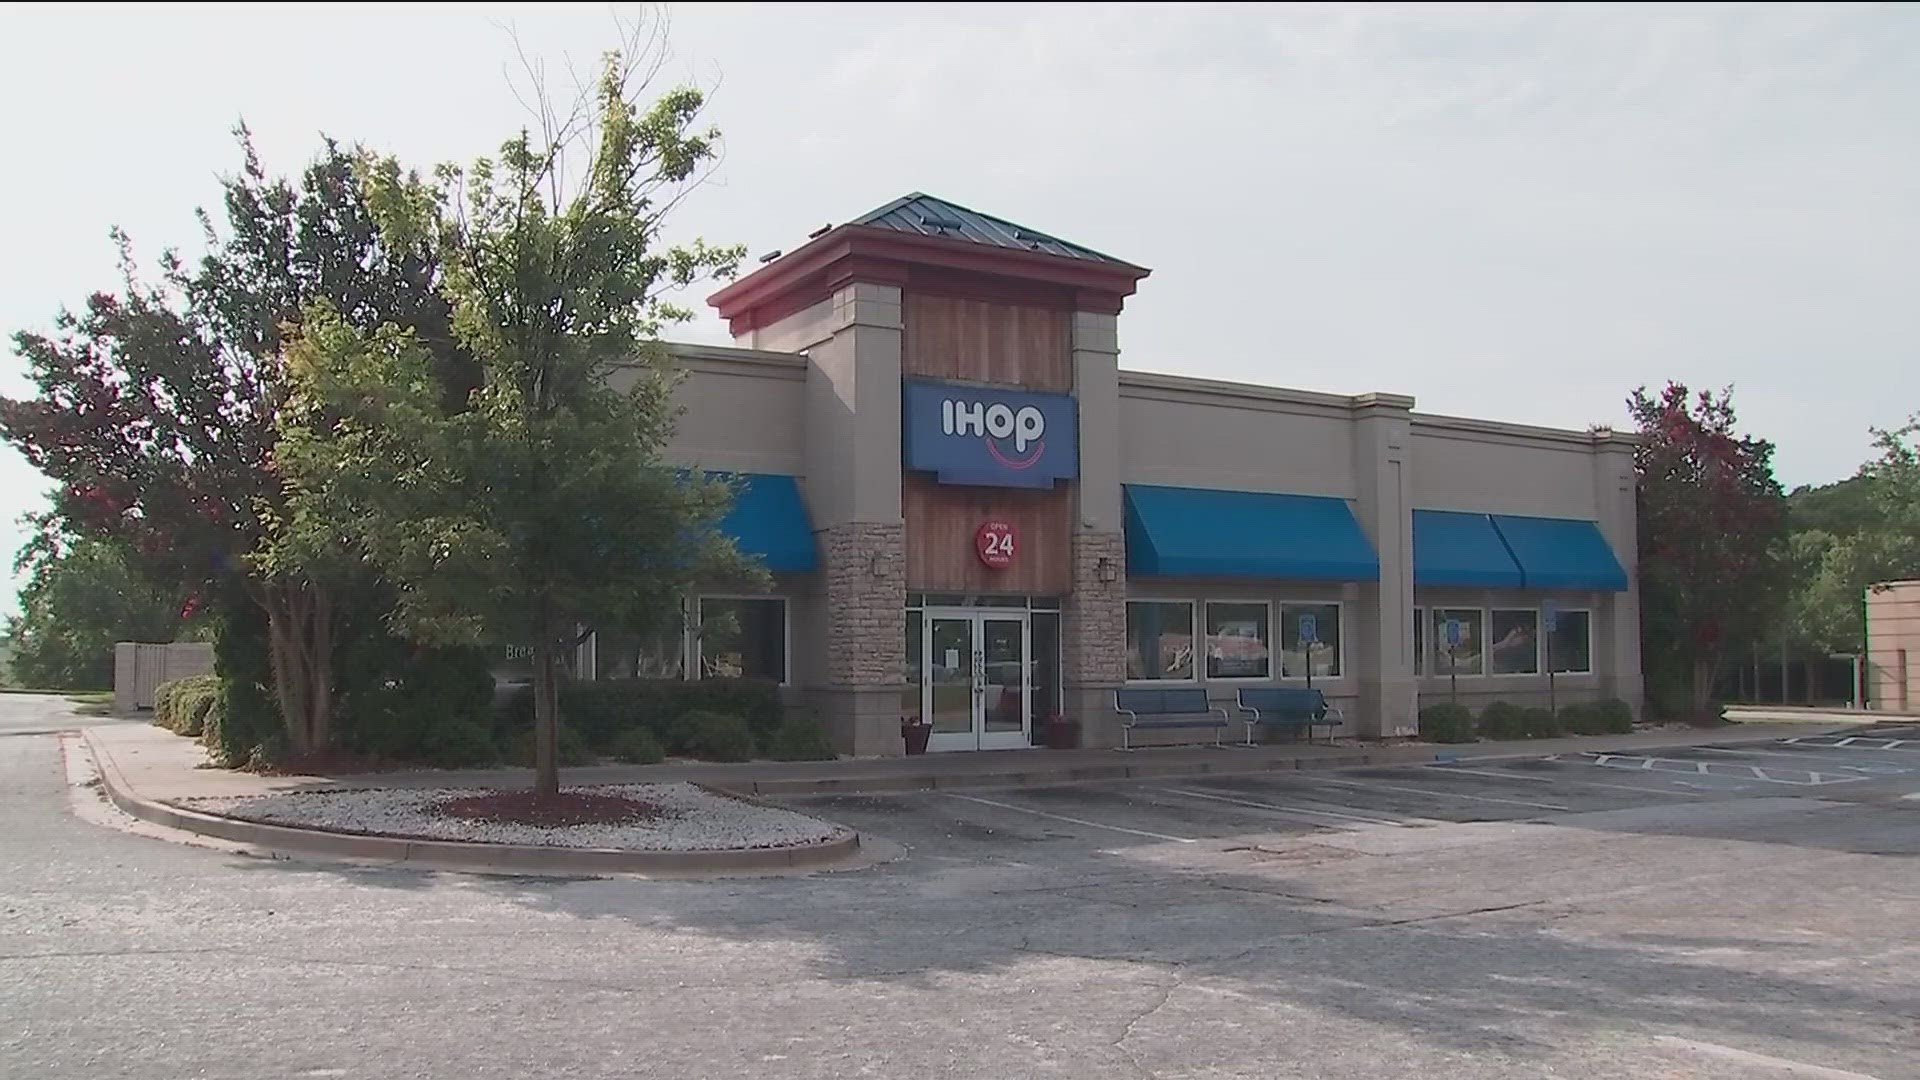 The 16-year-old was employed at IHOP and was working at the time of the shooting, DeKalb County Police said.